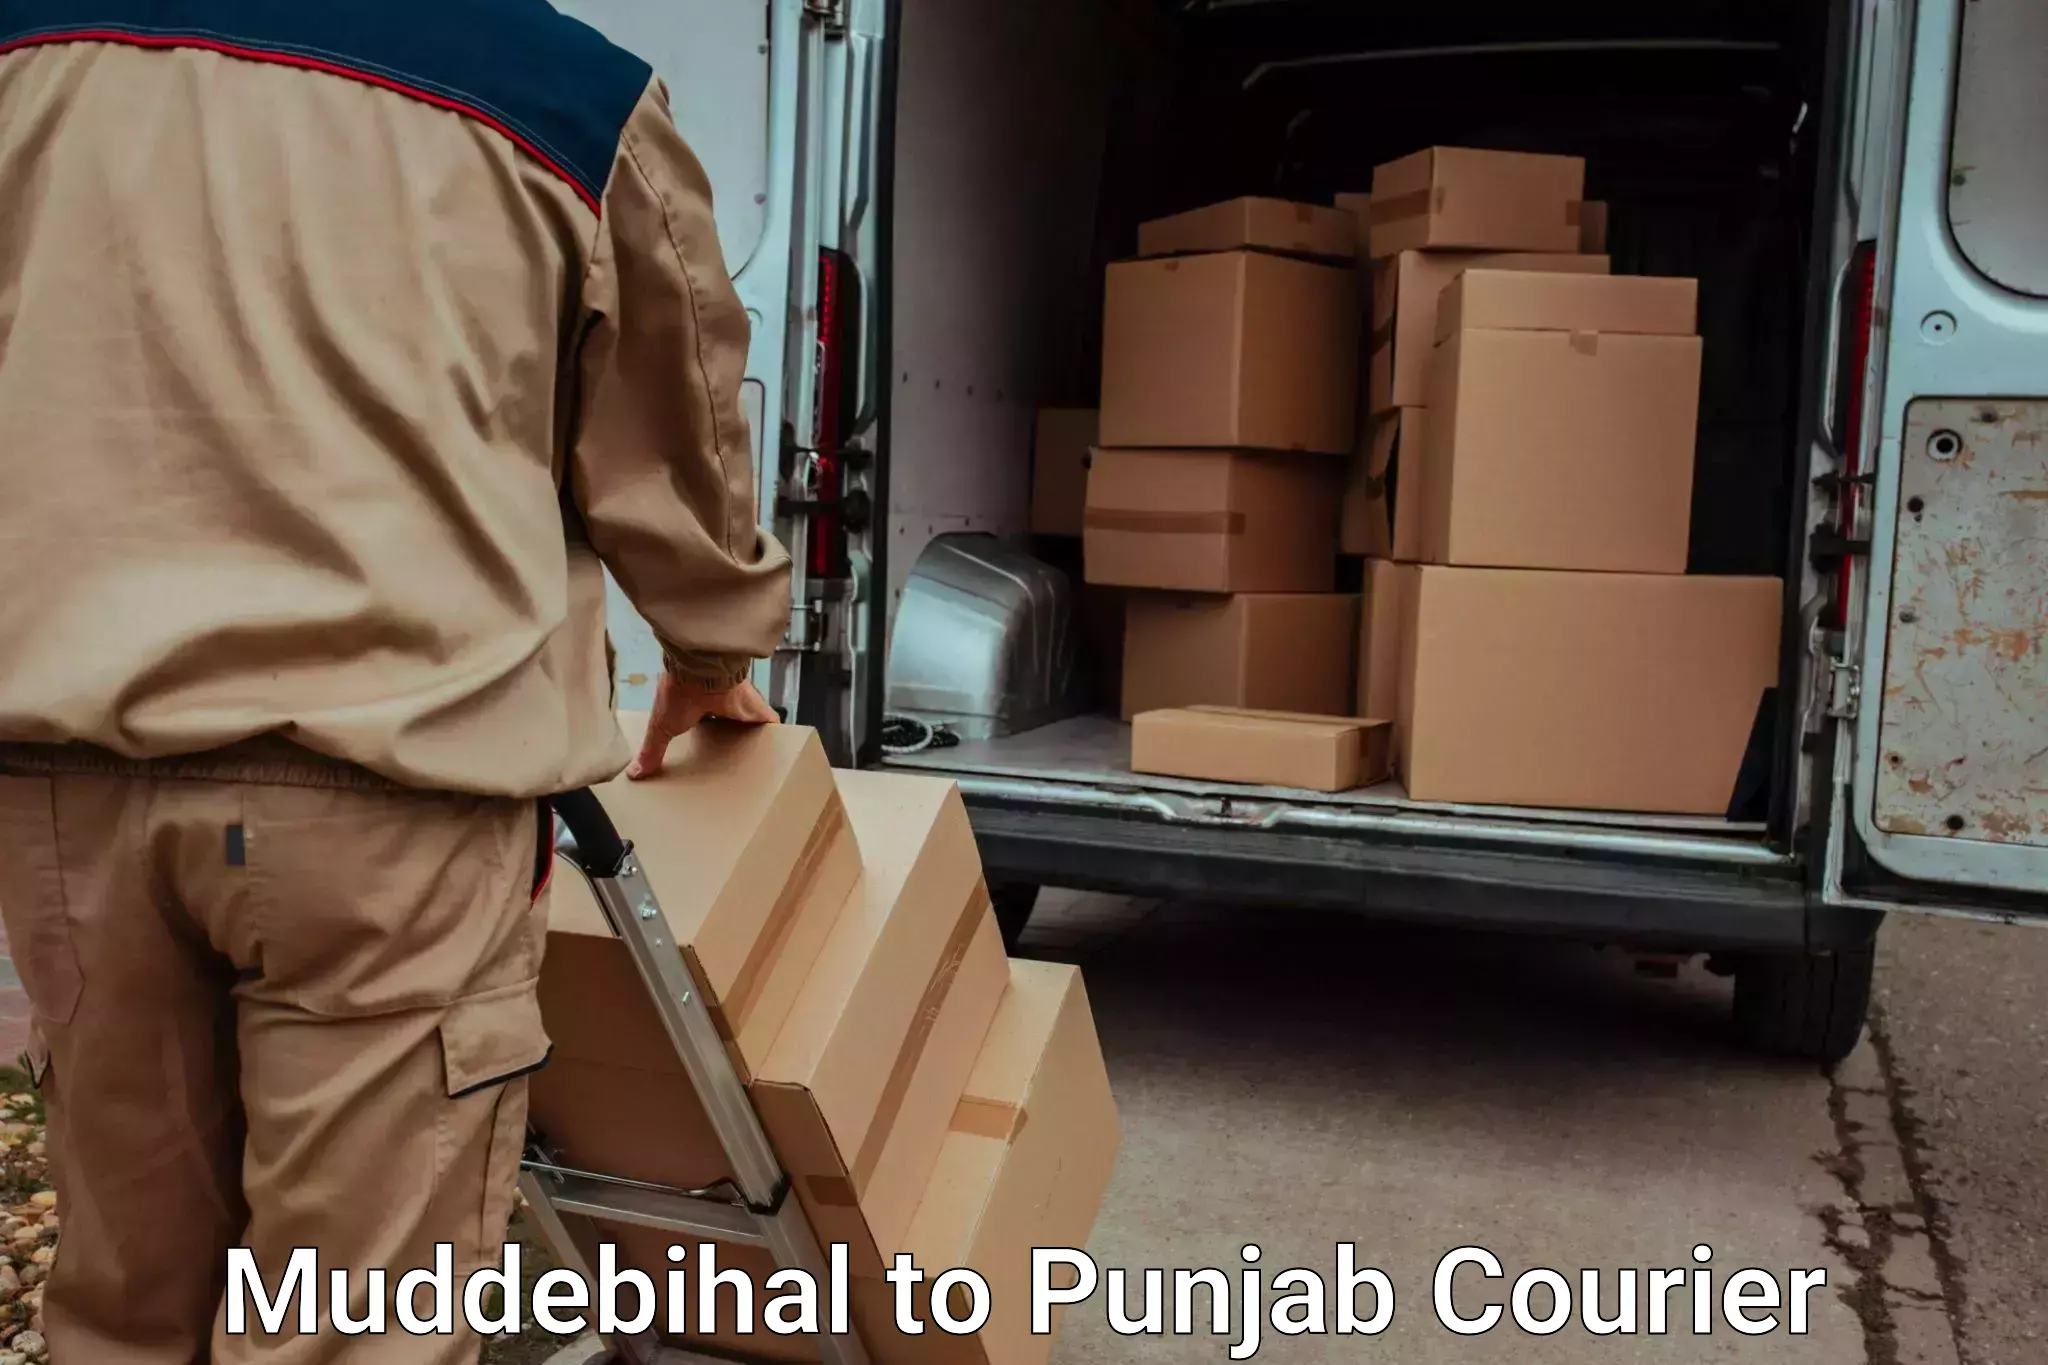 Professional movers and packers Muddebihal to Punjab